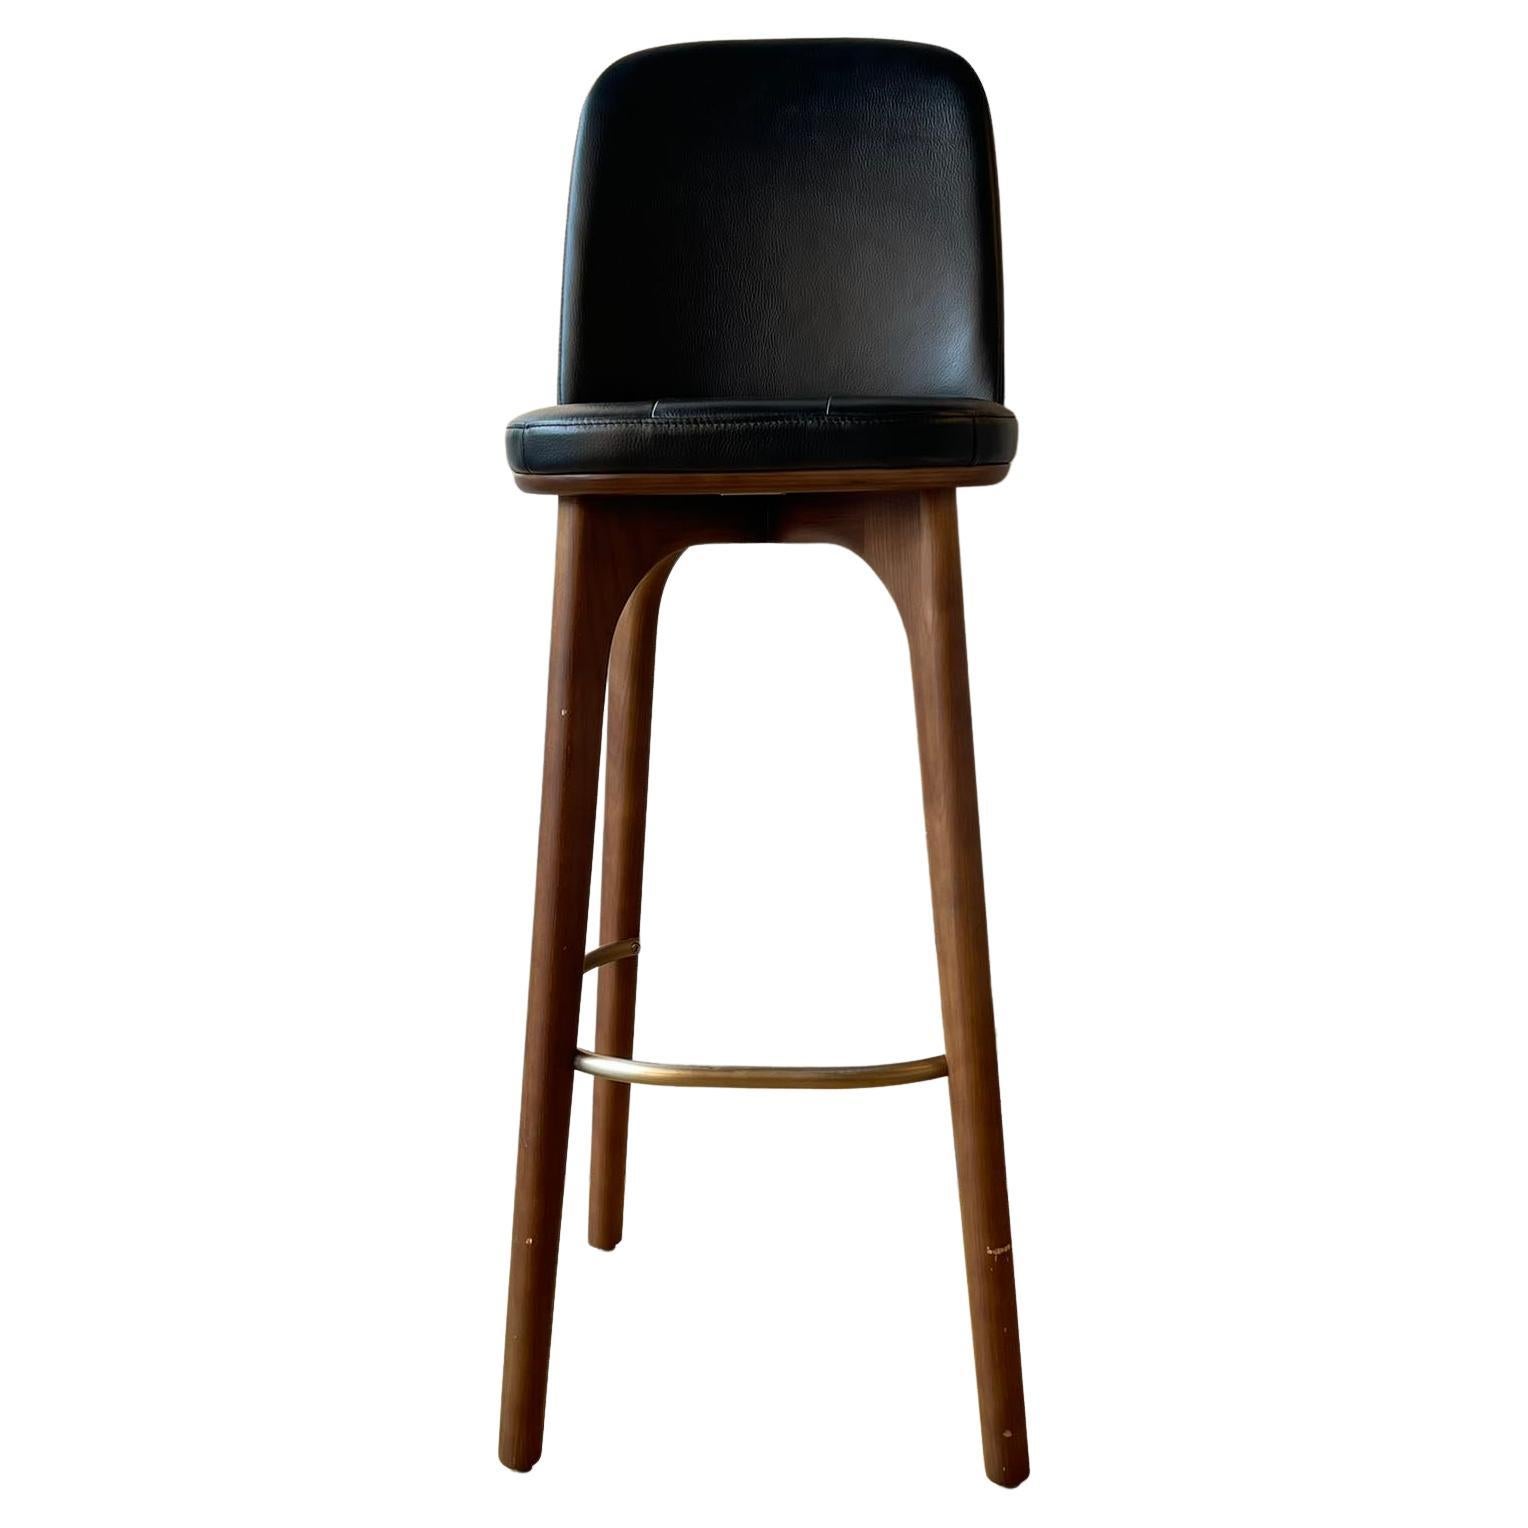 Walnut Stained Ash And Caress Black Leather Stool, Utility SH760